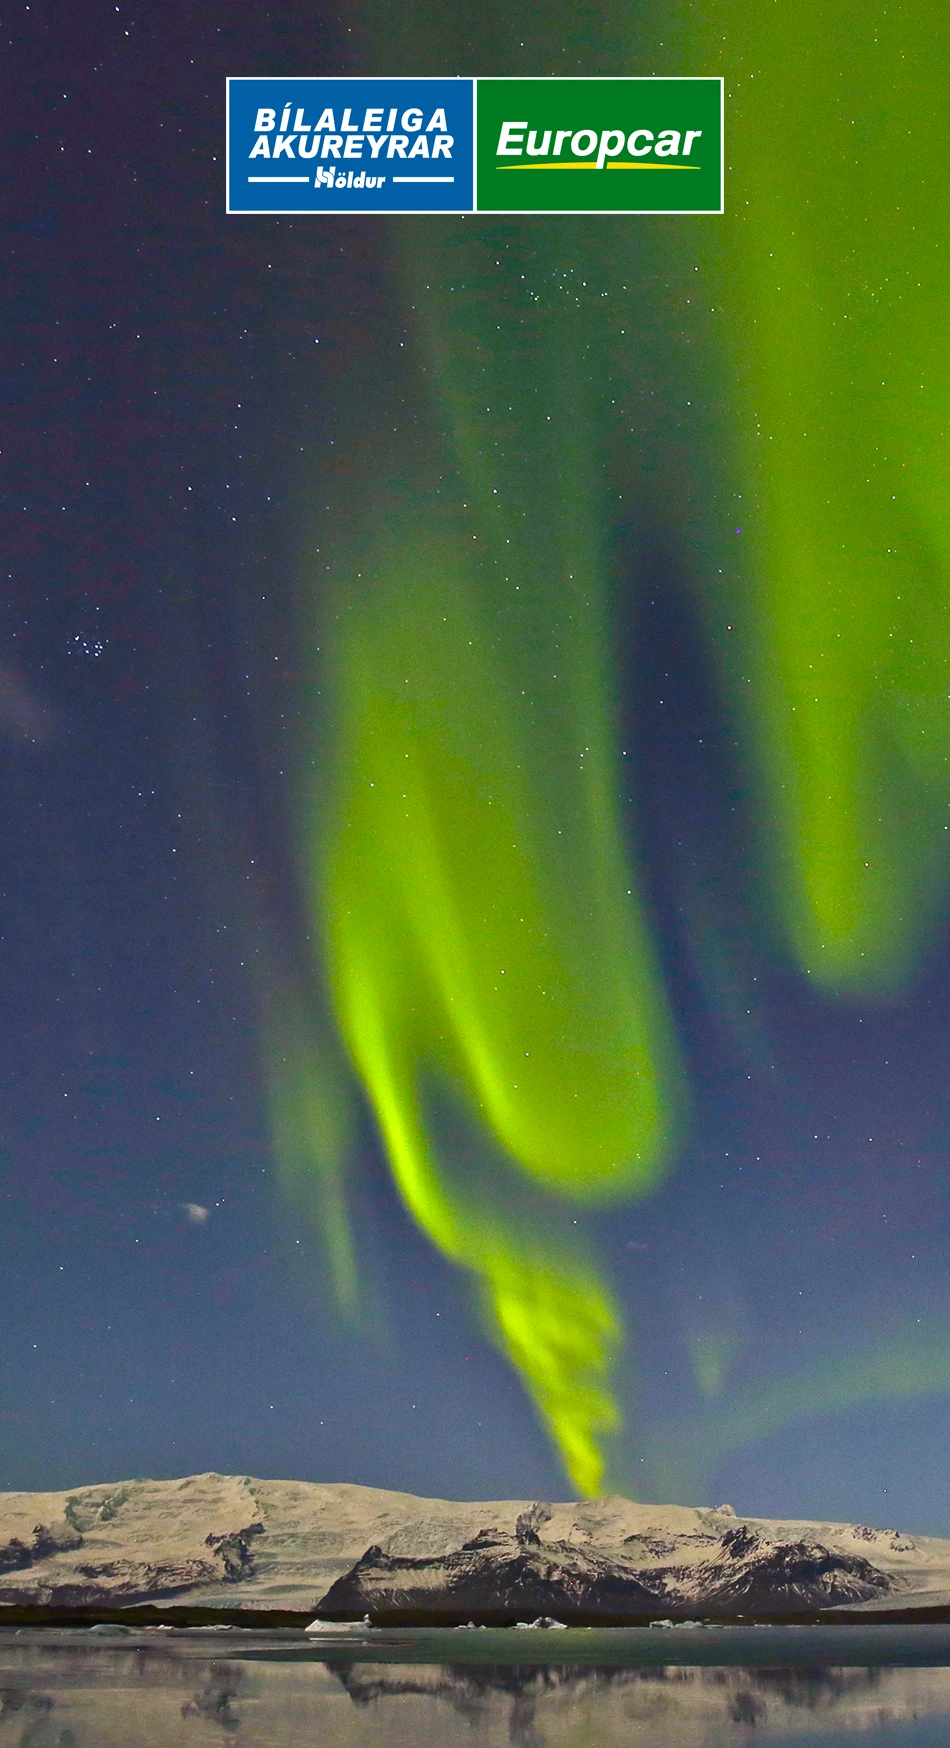 The northern light or aurora borealis dancing in the sky above Öræfajökull